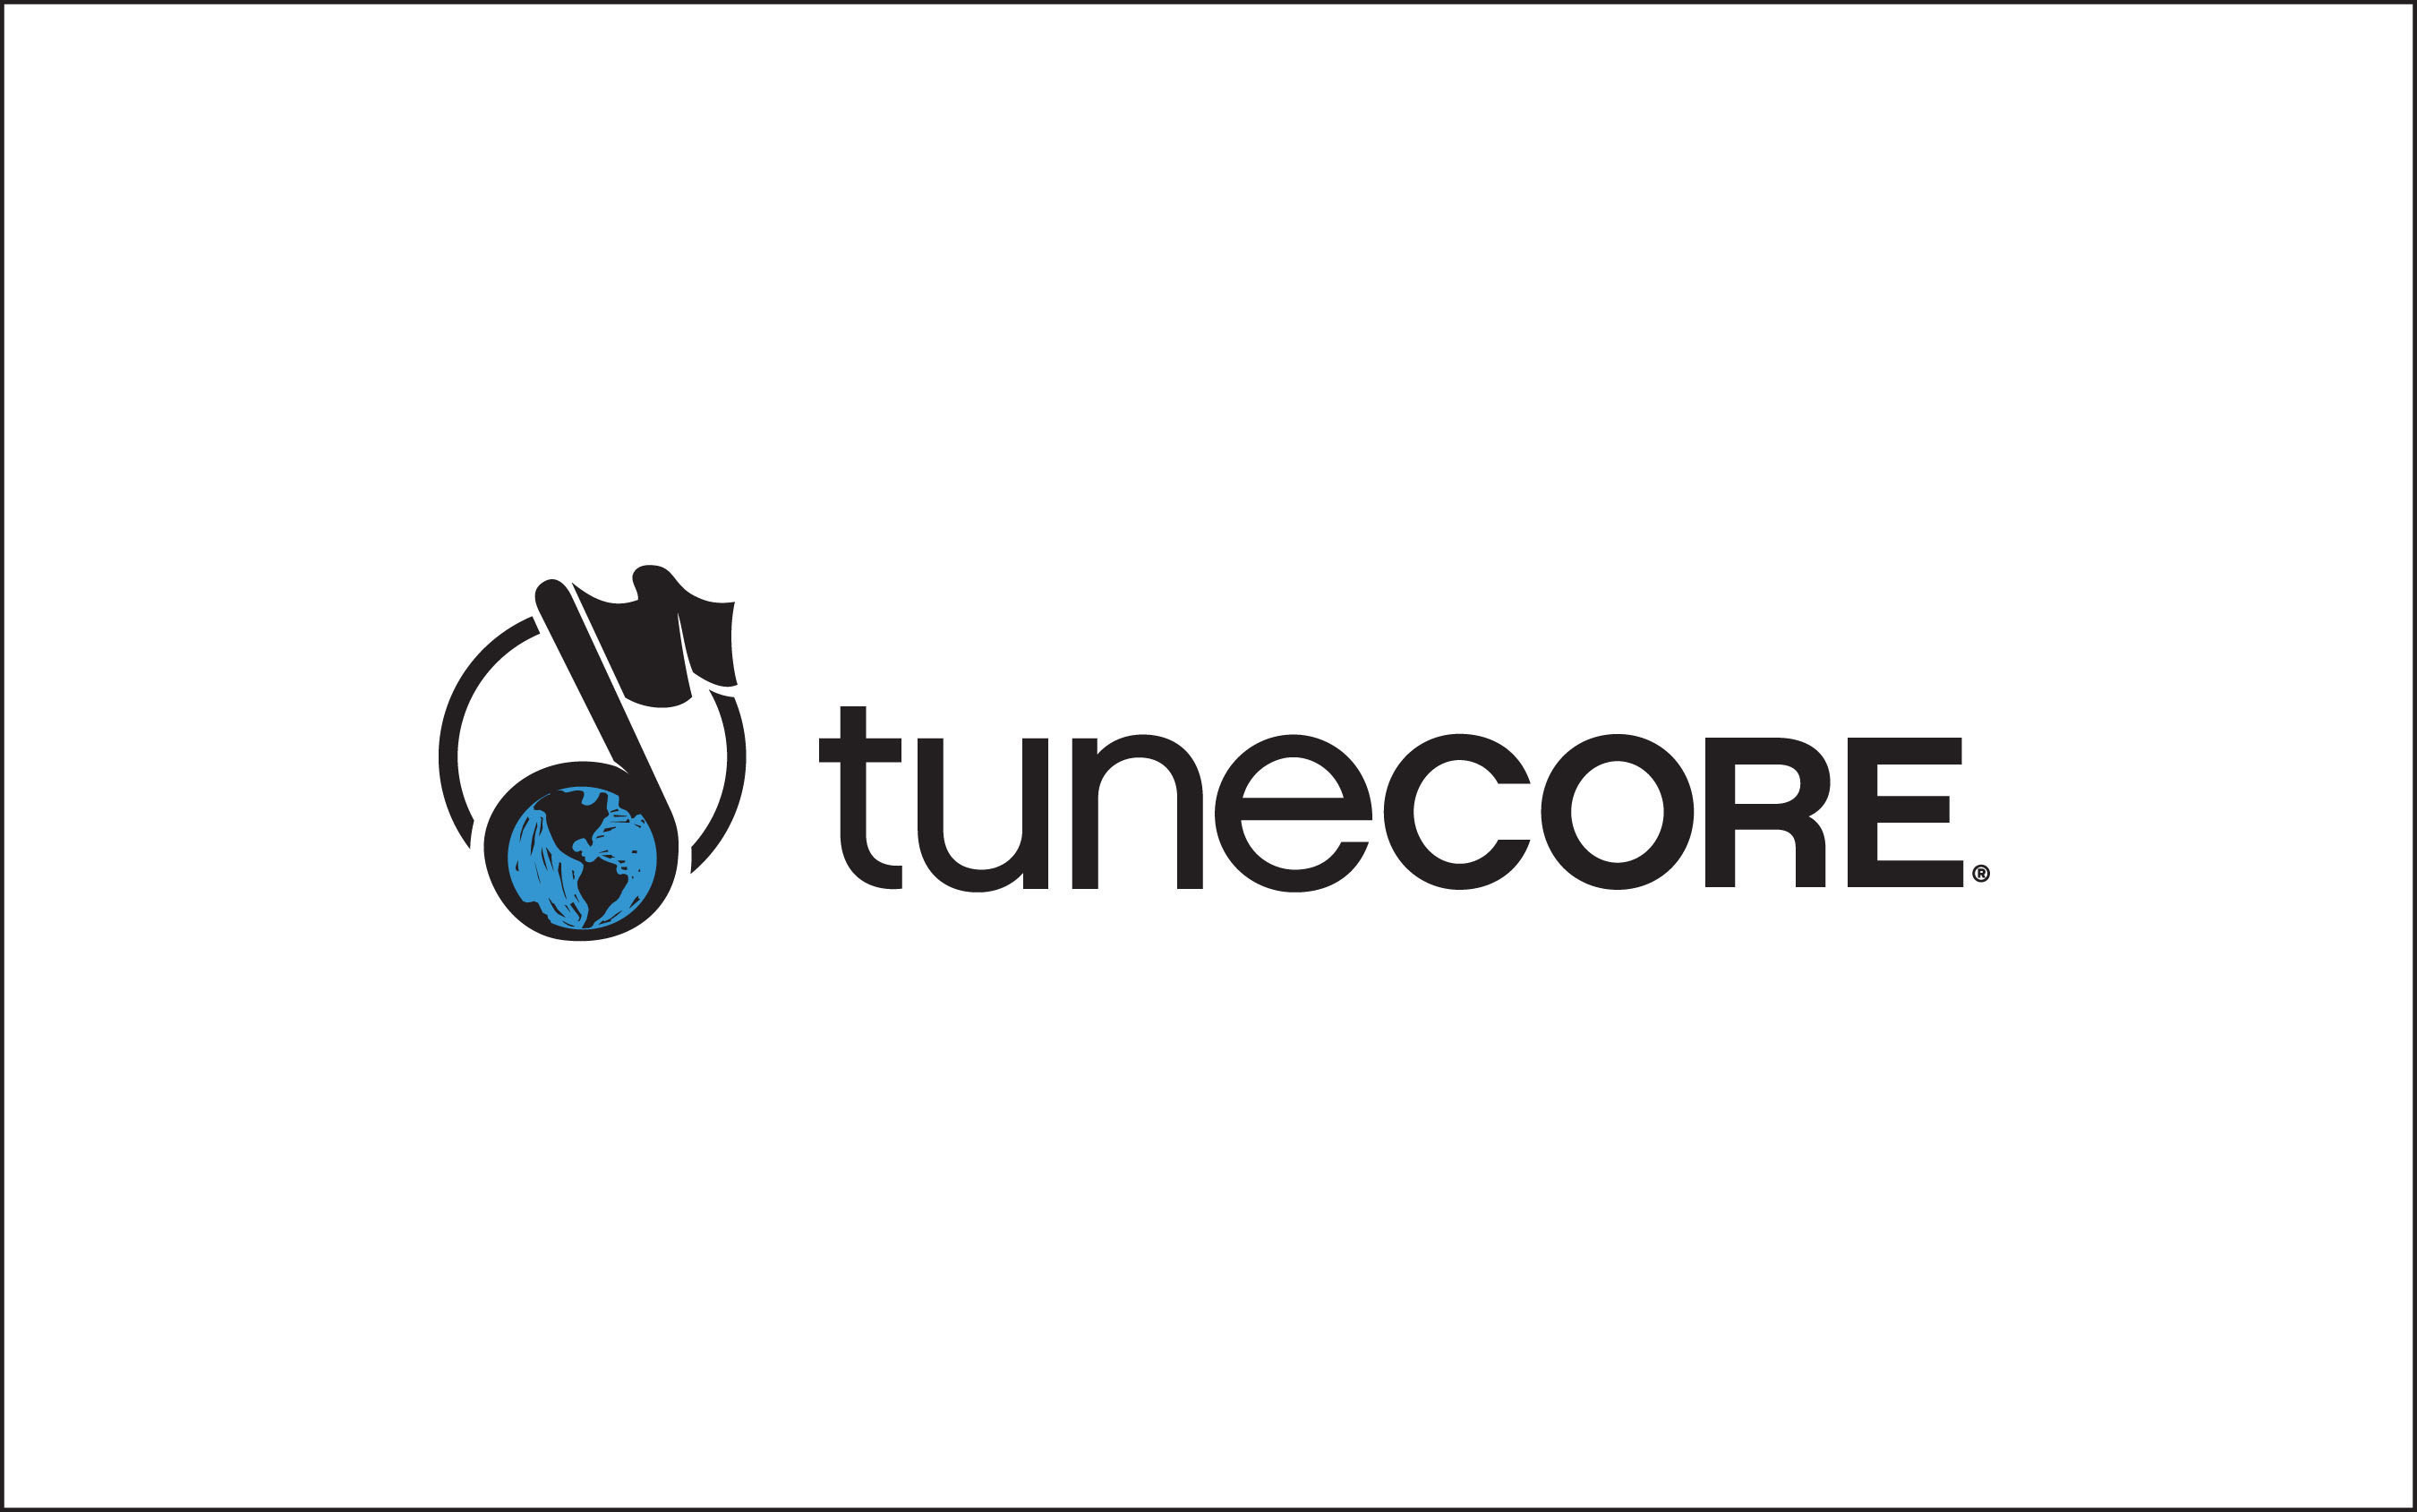 TuneCore brings more music to more people, while helping musicians and songwriters increase money-earning opportunities and take charge of their own careers. The company has one of the highest artist revenue-generating music catalogs in the world, earning TuneCore Artists $504 million on 12 billion streams and downloads since inception. TuneCore Music Distribution helps artists, labels and managers sell their music through iTunes, Amazon MP3, Spotify and other major download and streaming sites while...